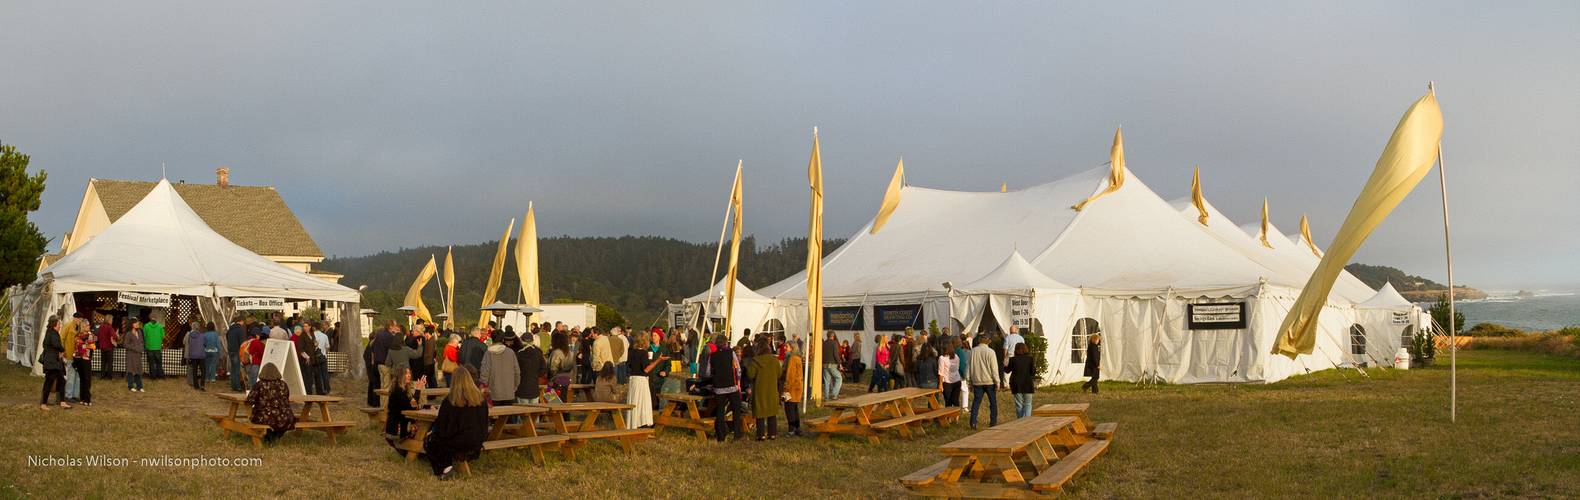 Panoramic view of the MMF's big 850-seat concert tent on the grounds of Mendocino Headlands State Park.